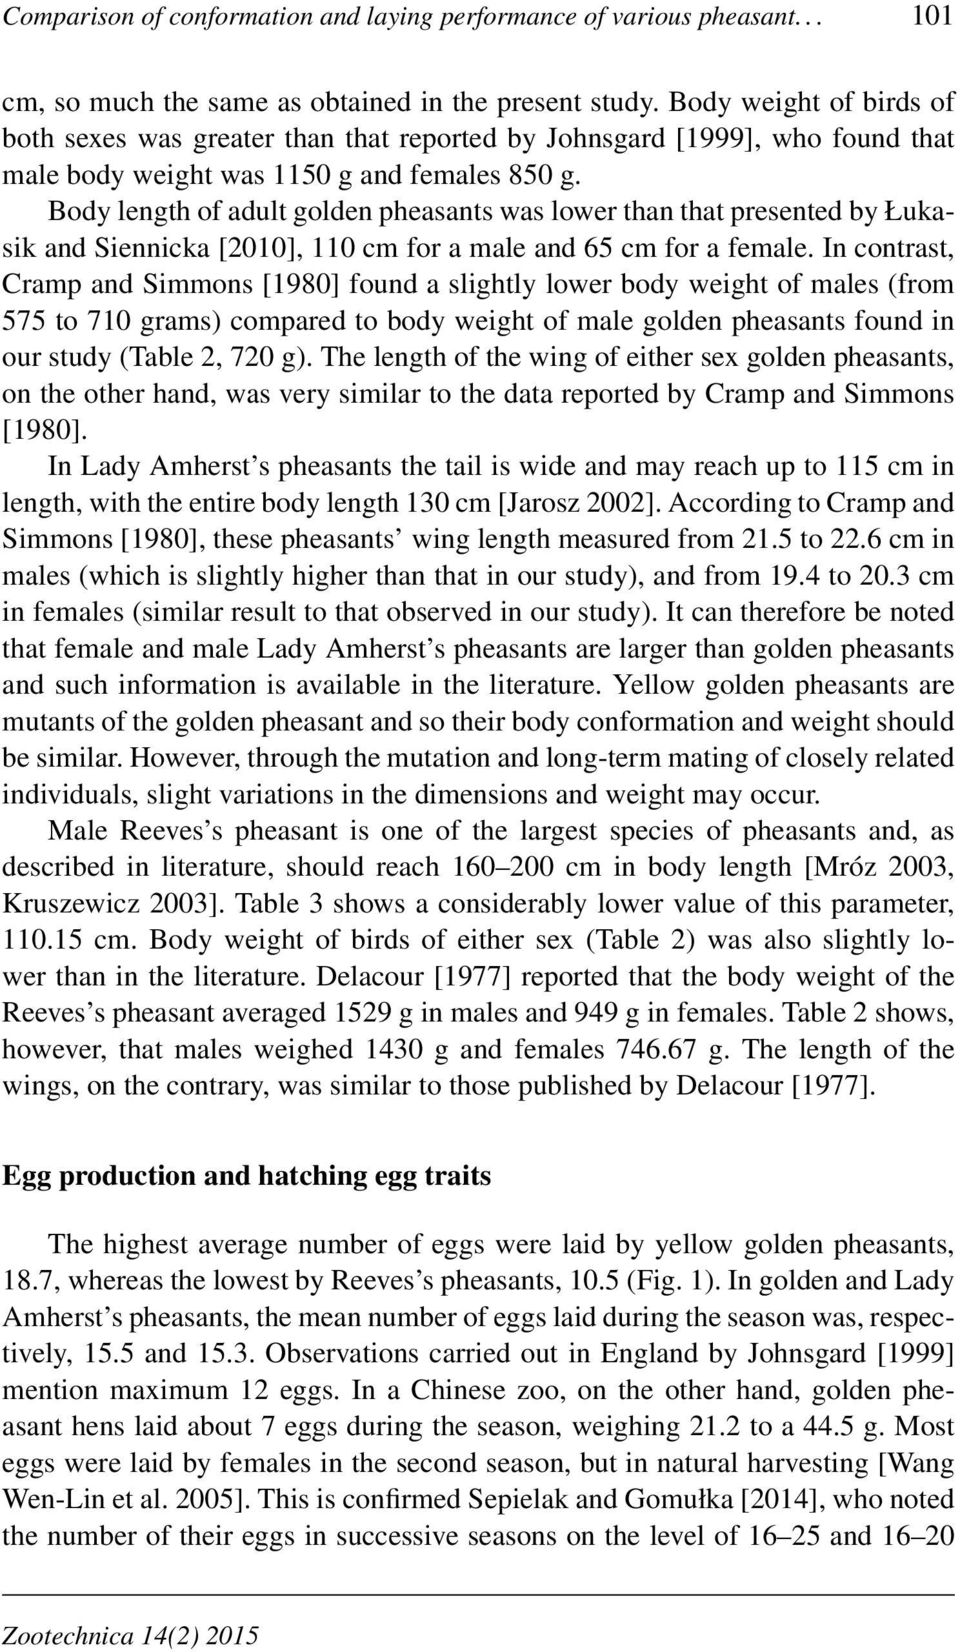 Body length of adult golden pheasants was lower than that presented by Łukasik and Siennicka [2010], 110 cm for a male and 65 cm for a female.